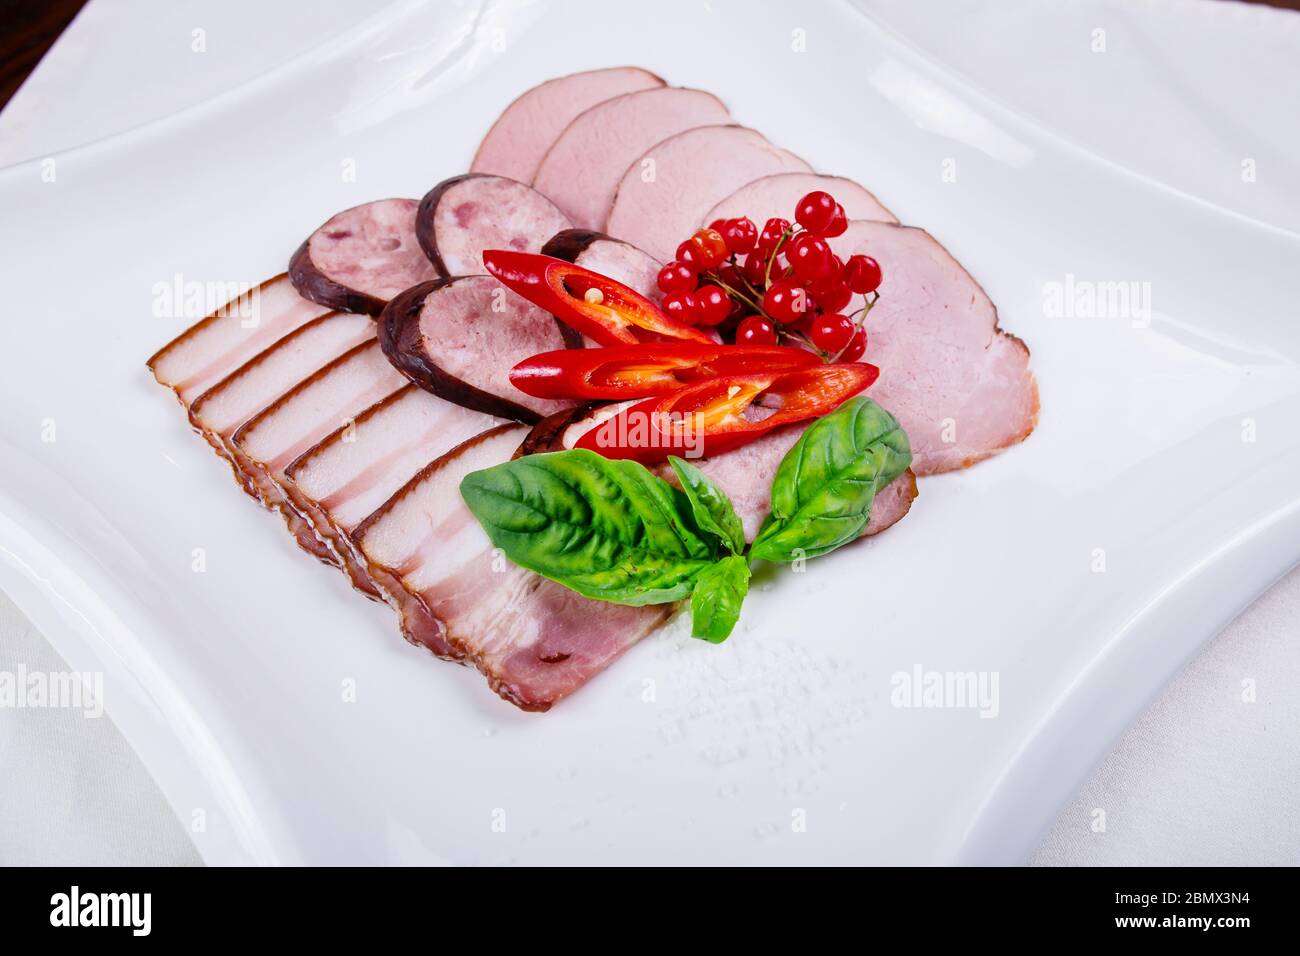 Bacon, ham and sausage on a white plate decorated greens and peppers Stock Photo